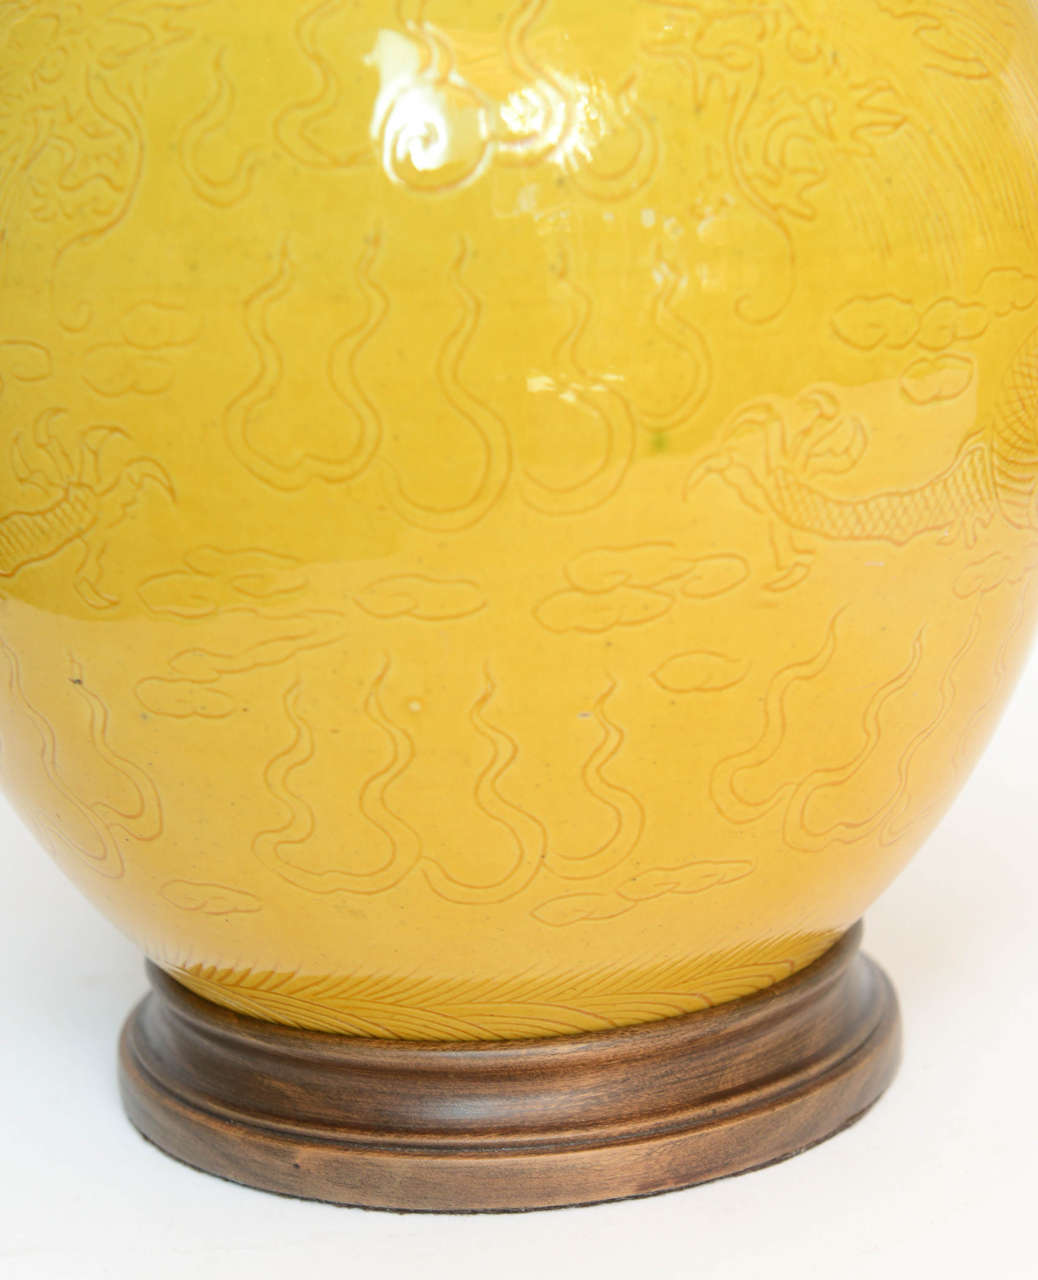 Pair of Chinese Porcelain Round Yellow Vase Lamps, circa 18th Century For Sale 2